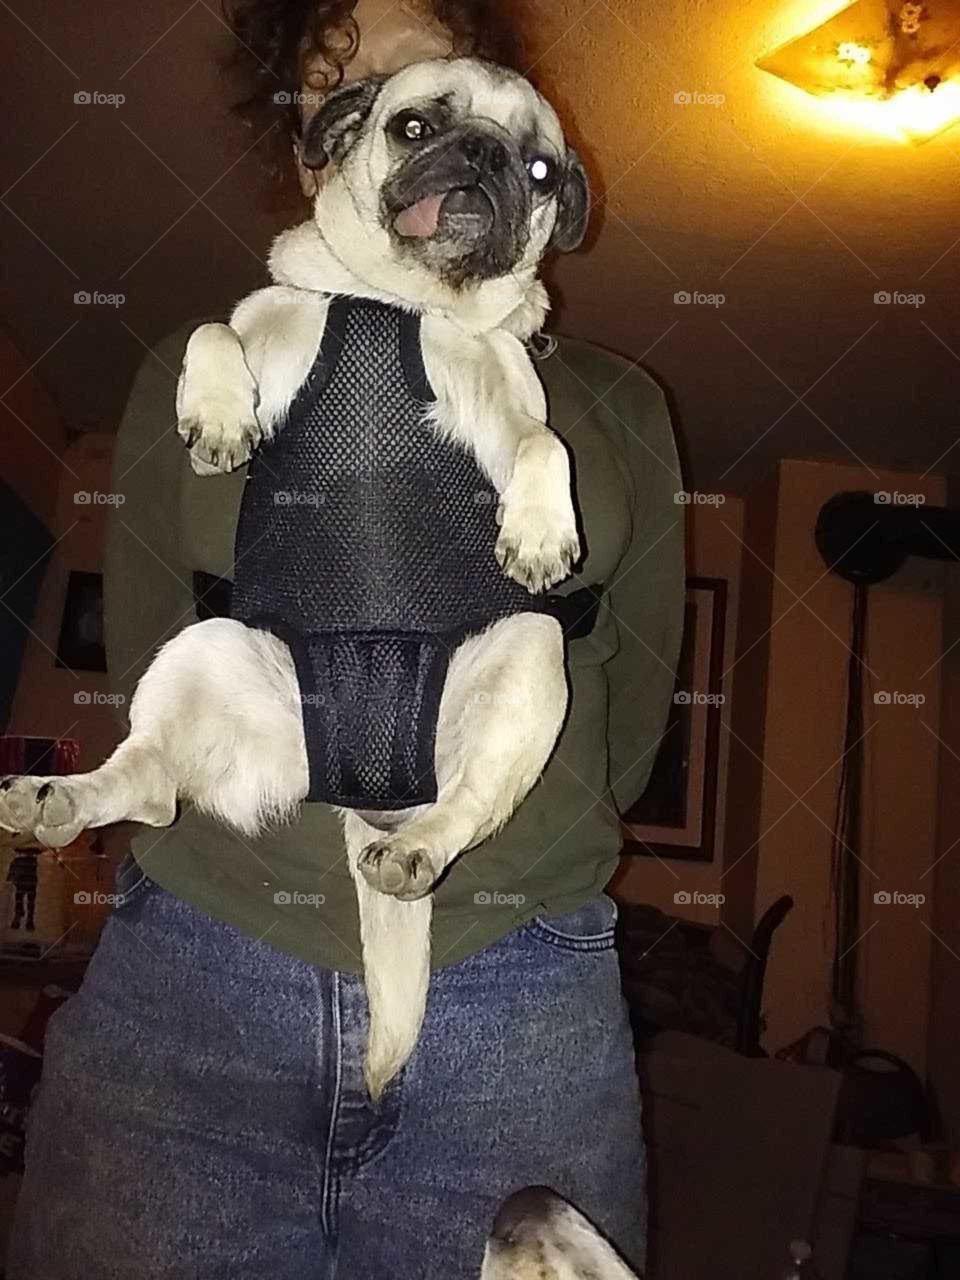 Lucy the pug